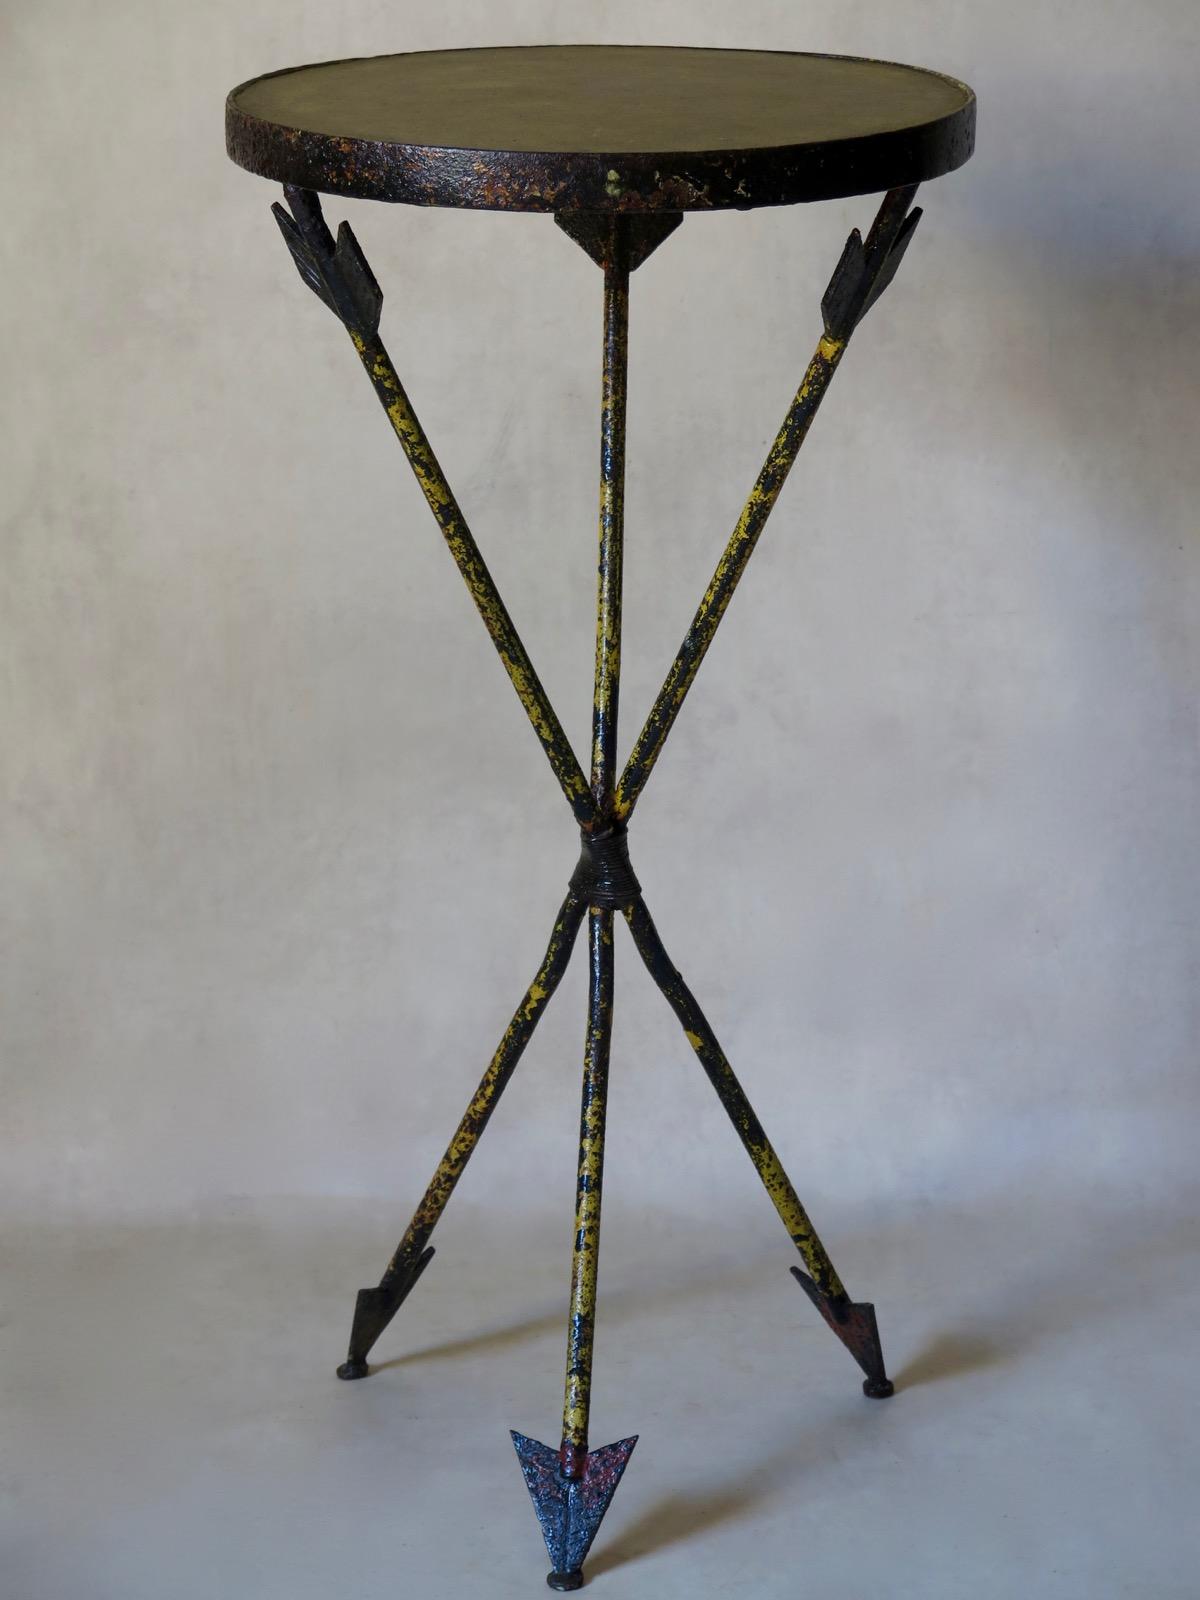 Elegant French Art Deco table from the 1940s, raised on a tripod base, with original red and yellow polychrome finish. The legs end in large arrowheads. Beige/grey resin top. The wrought iron has acquired a pleasant, pitted surface.